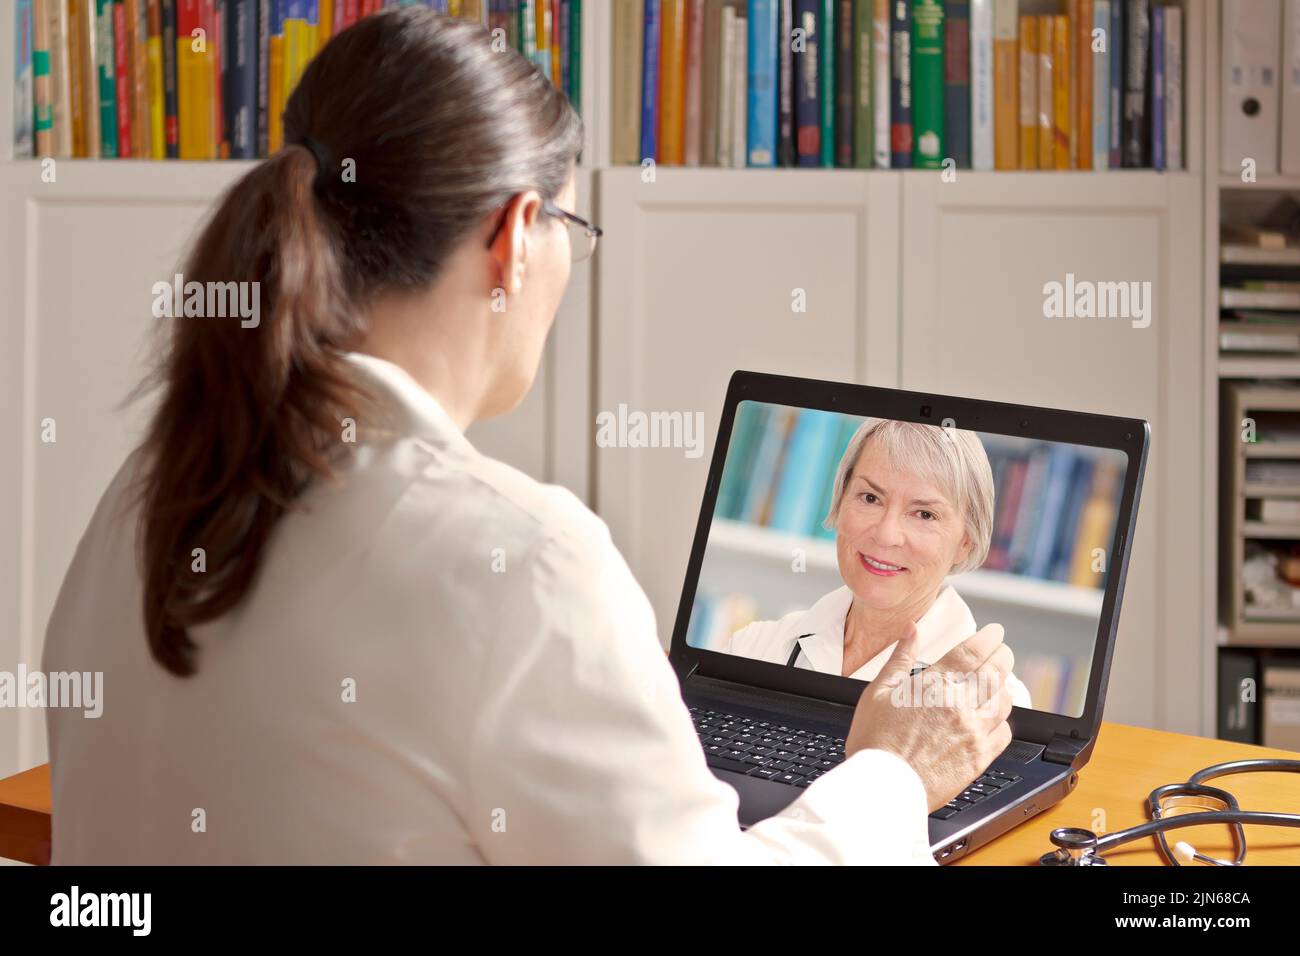 Telemedicine concept: two doctors or pharmacists during a medical video conference about examination results. Stock Photo